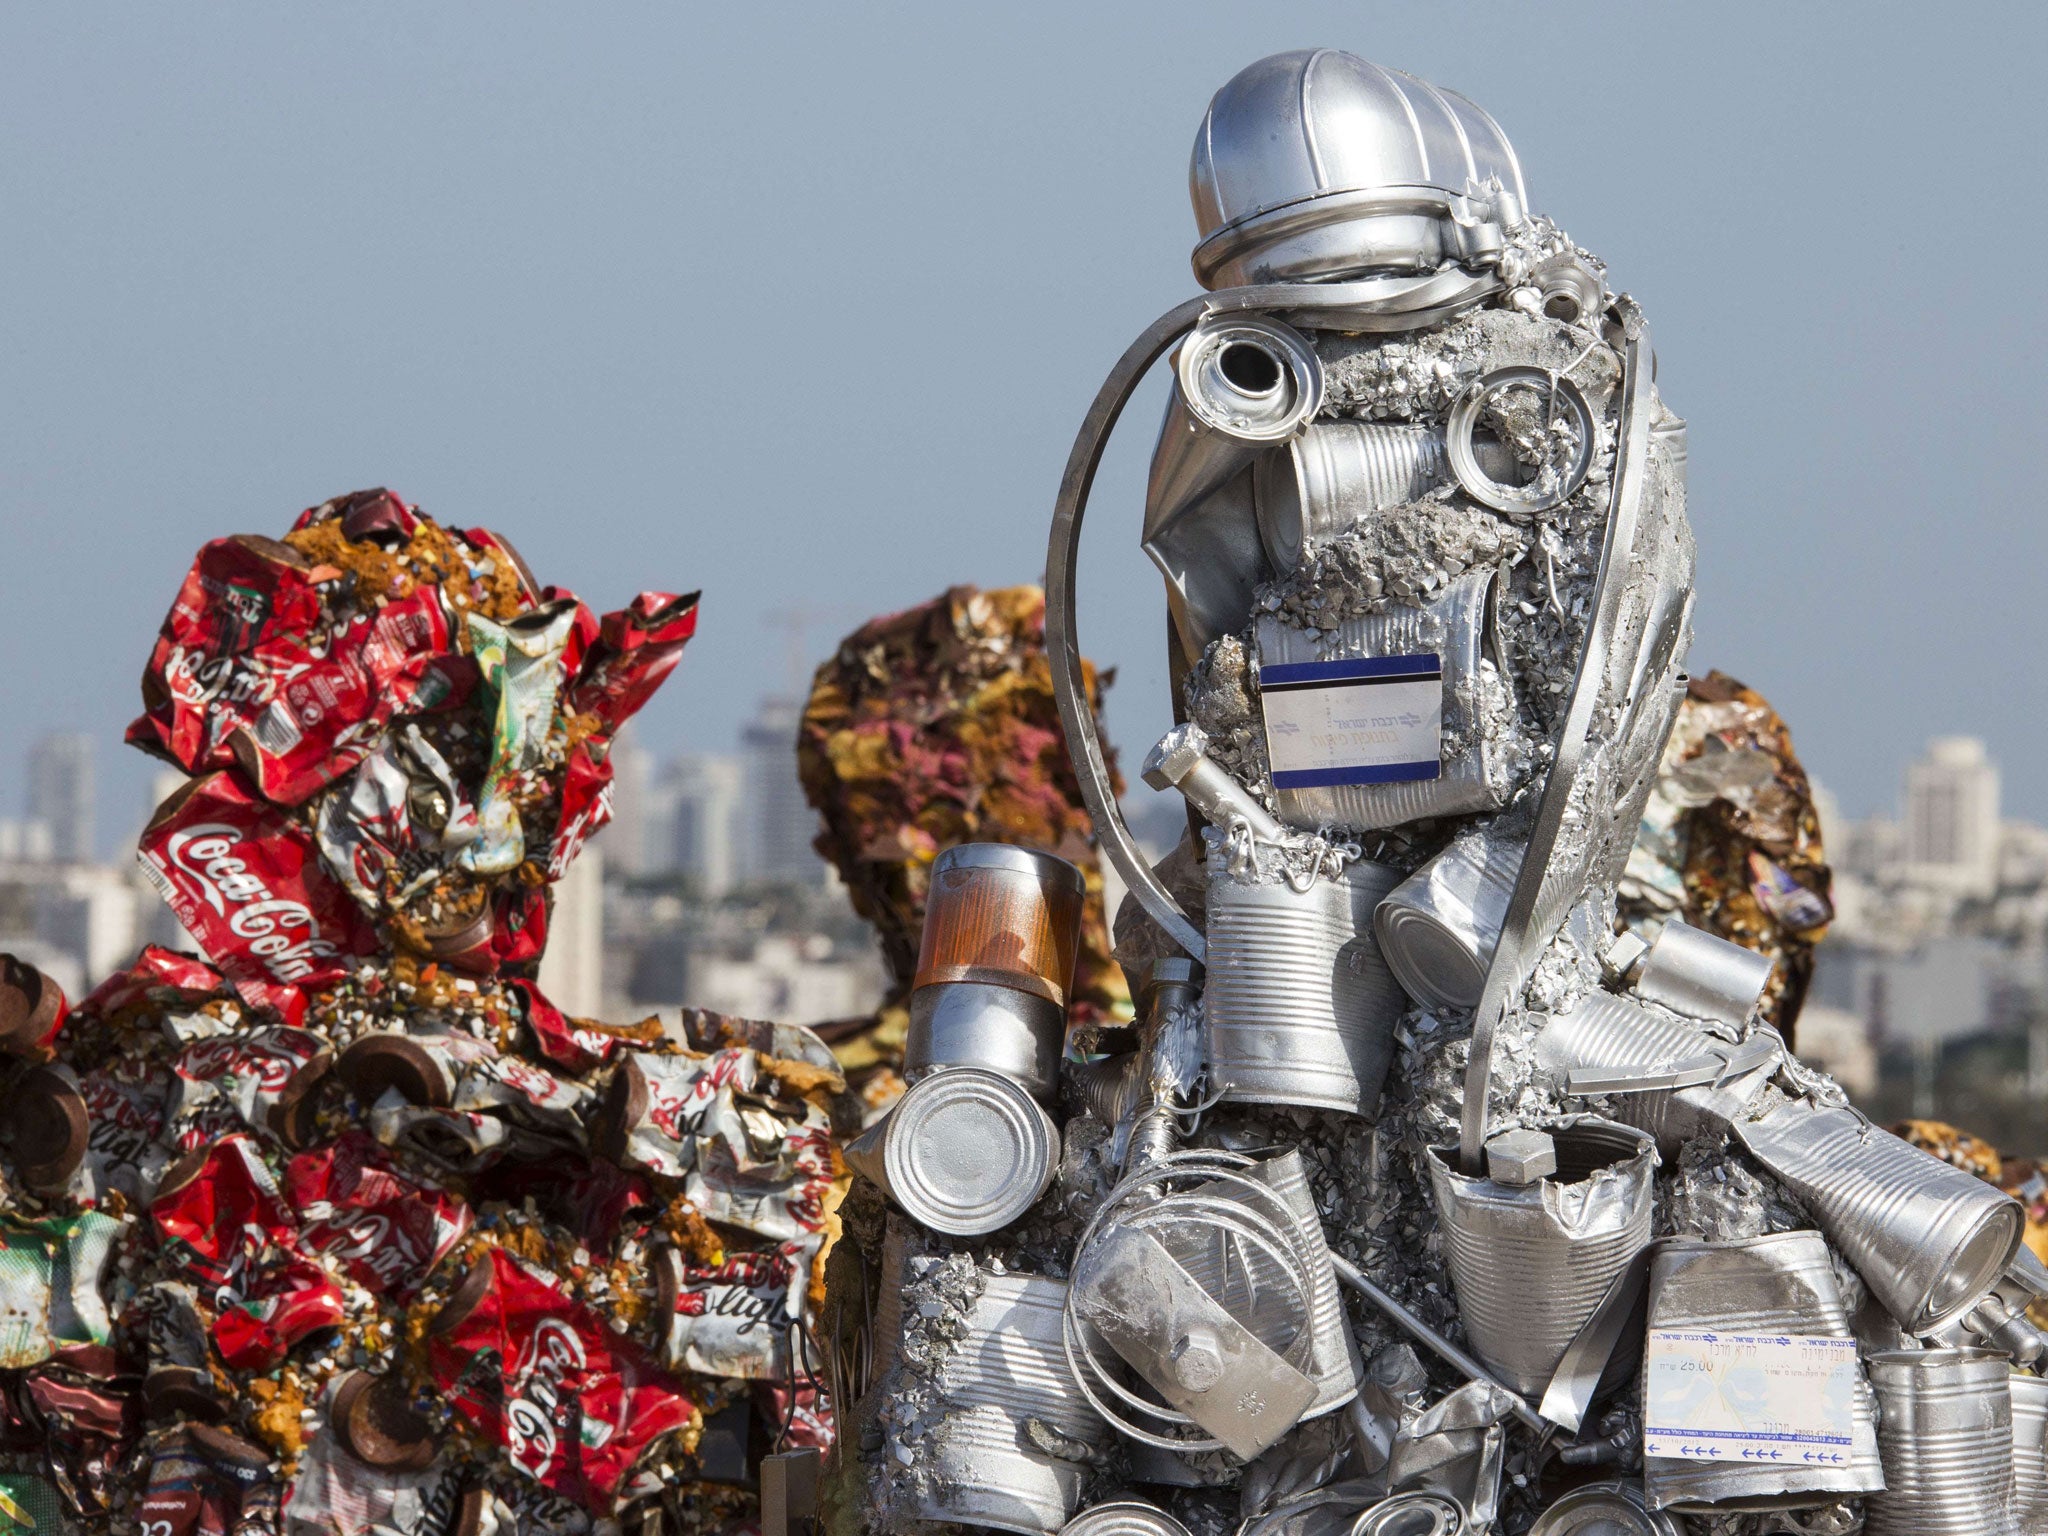 Sculptures made of waste material titled 'Trash People' by German Artist HA Schult in Ariel Sharon Park, in the suburbs of Tel Aviv